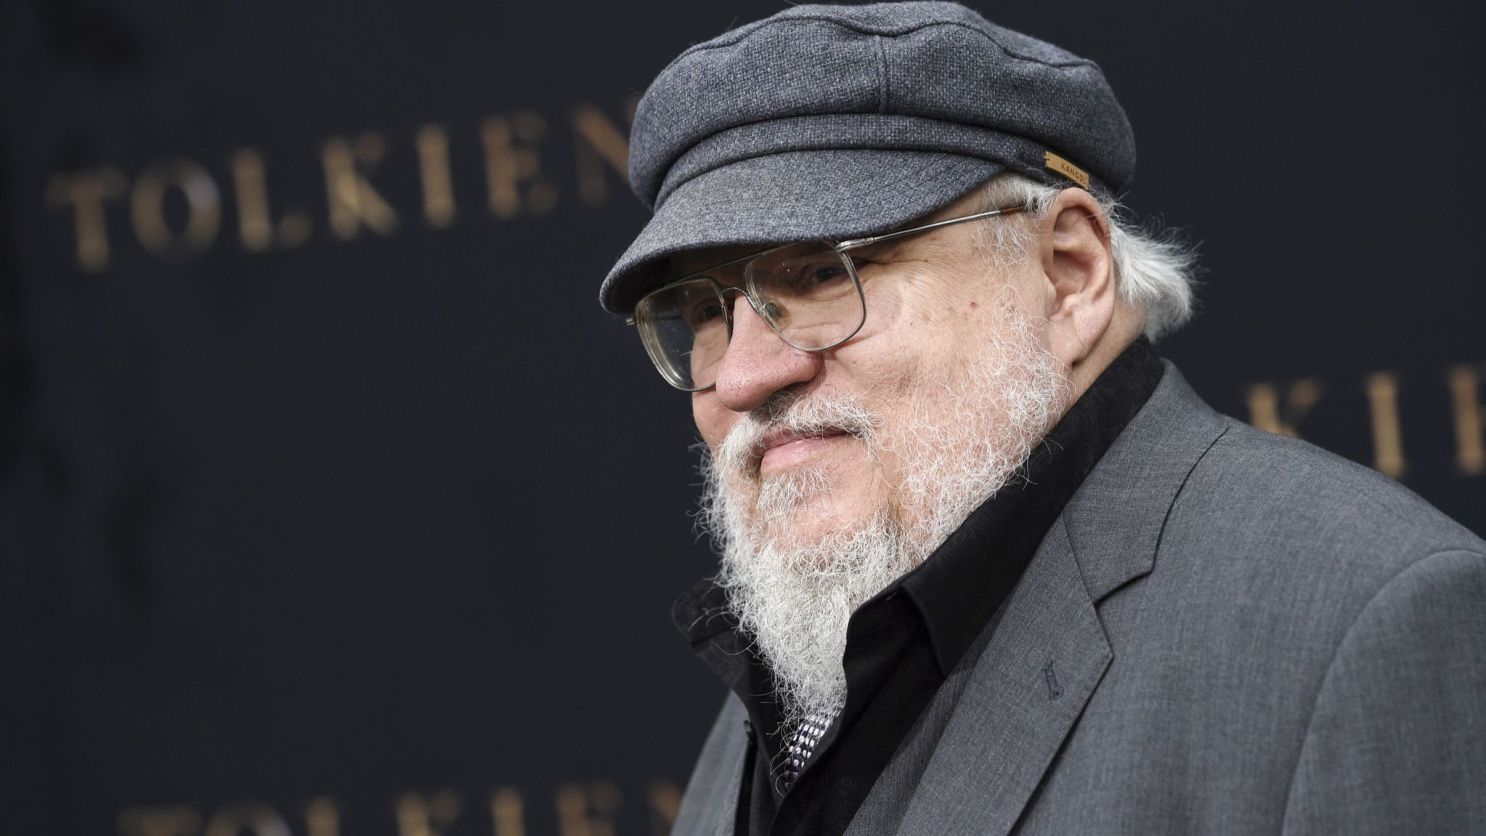 The Winds of Winter Release Date Updates Covid-19 Pandemic to Delay the George RR Martin Book